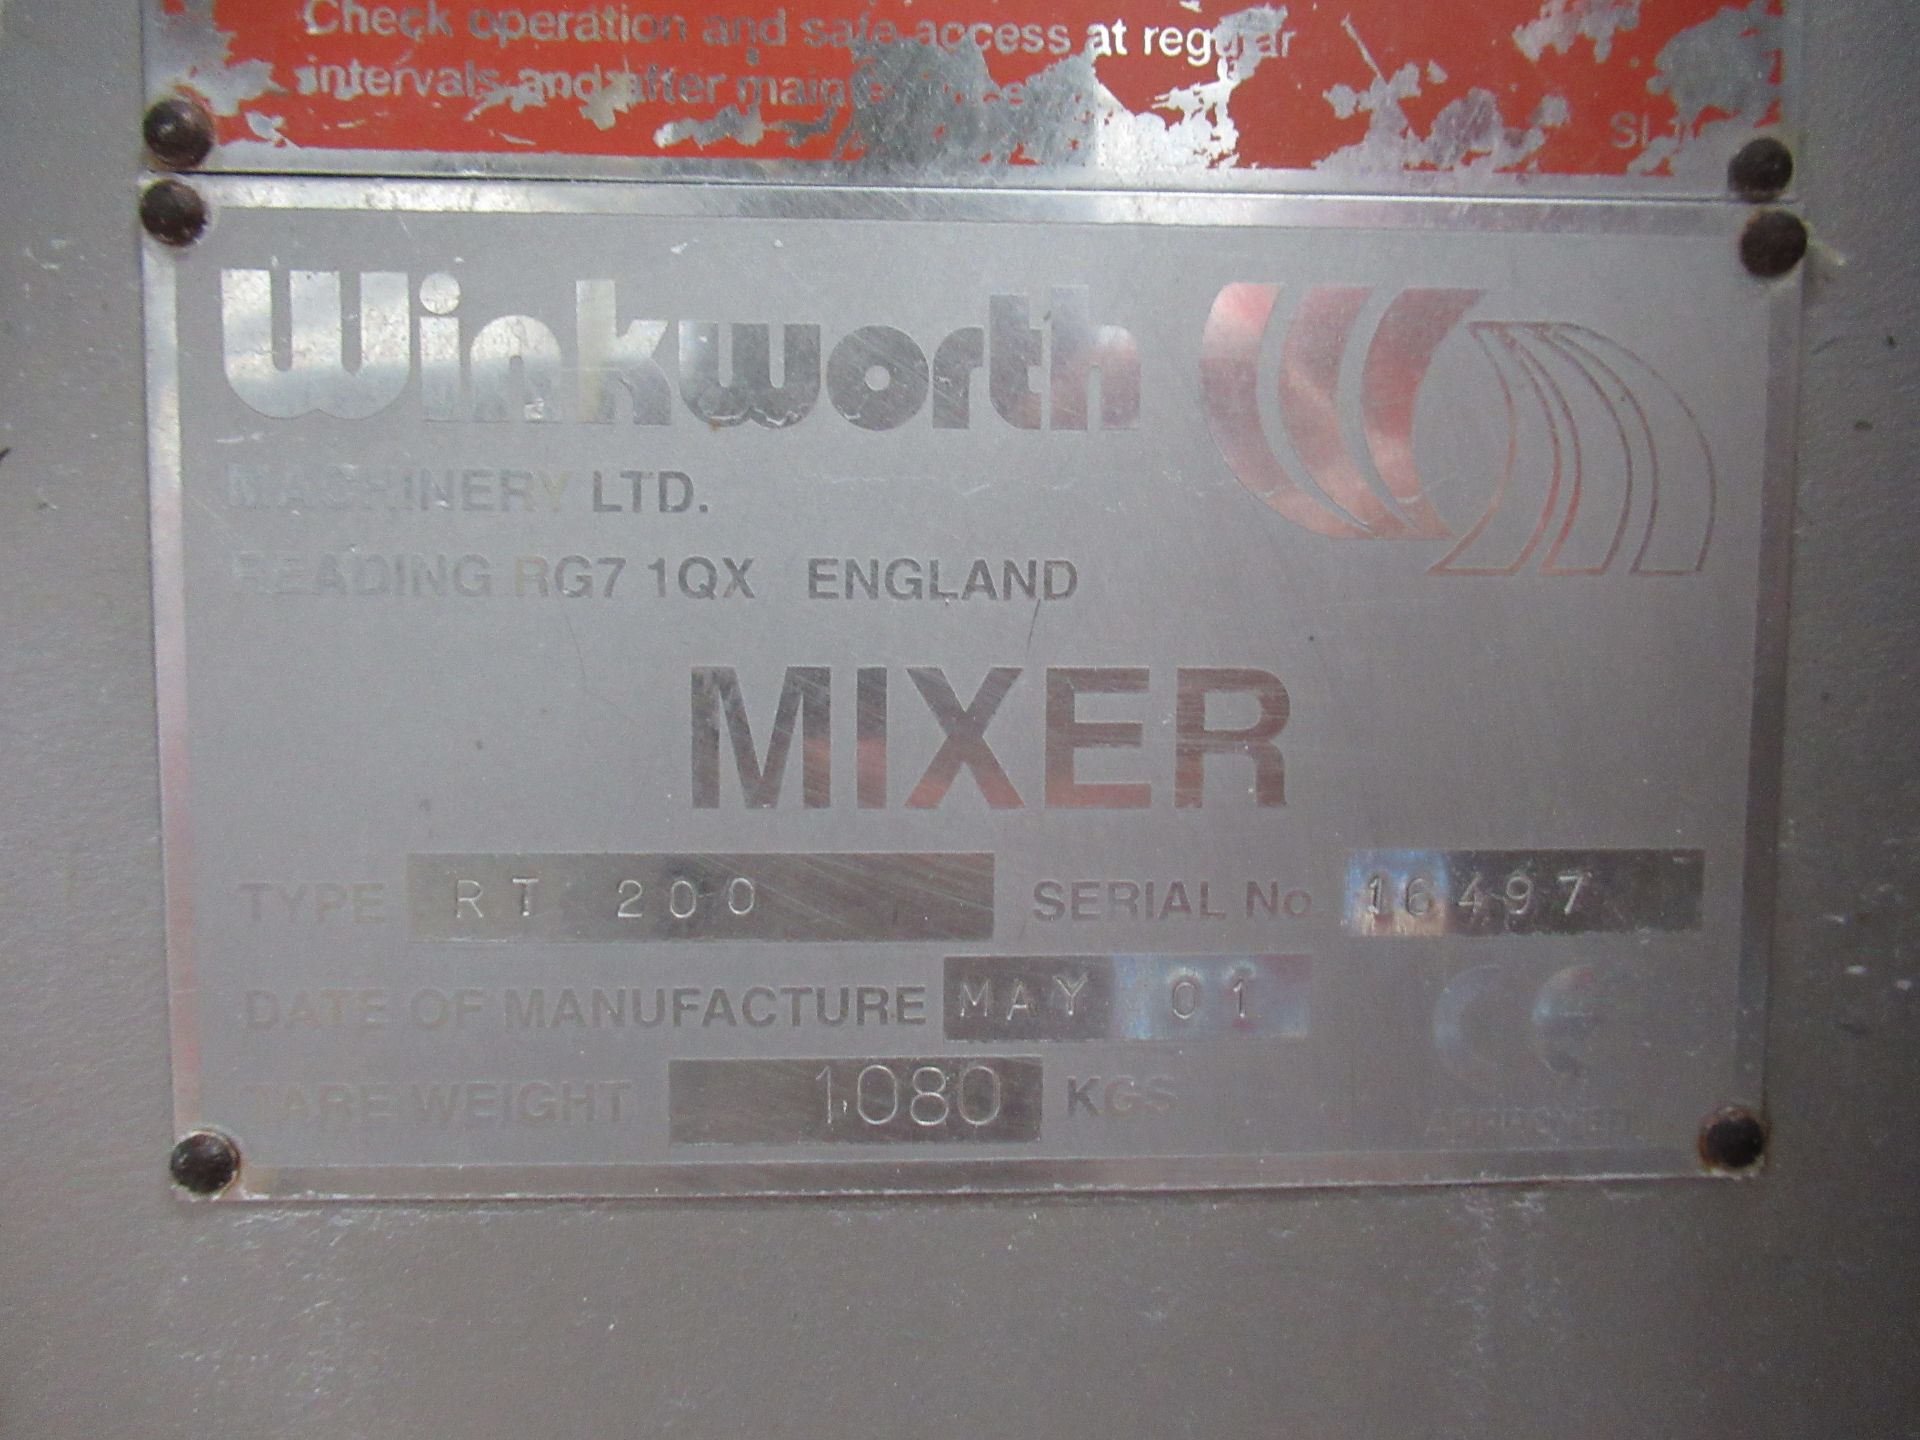 Winkworth RT200 stainless steel mixer Serial no: 16497 (2001) tare weight 1080kg, with fixed Base - Image 7 of 14